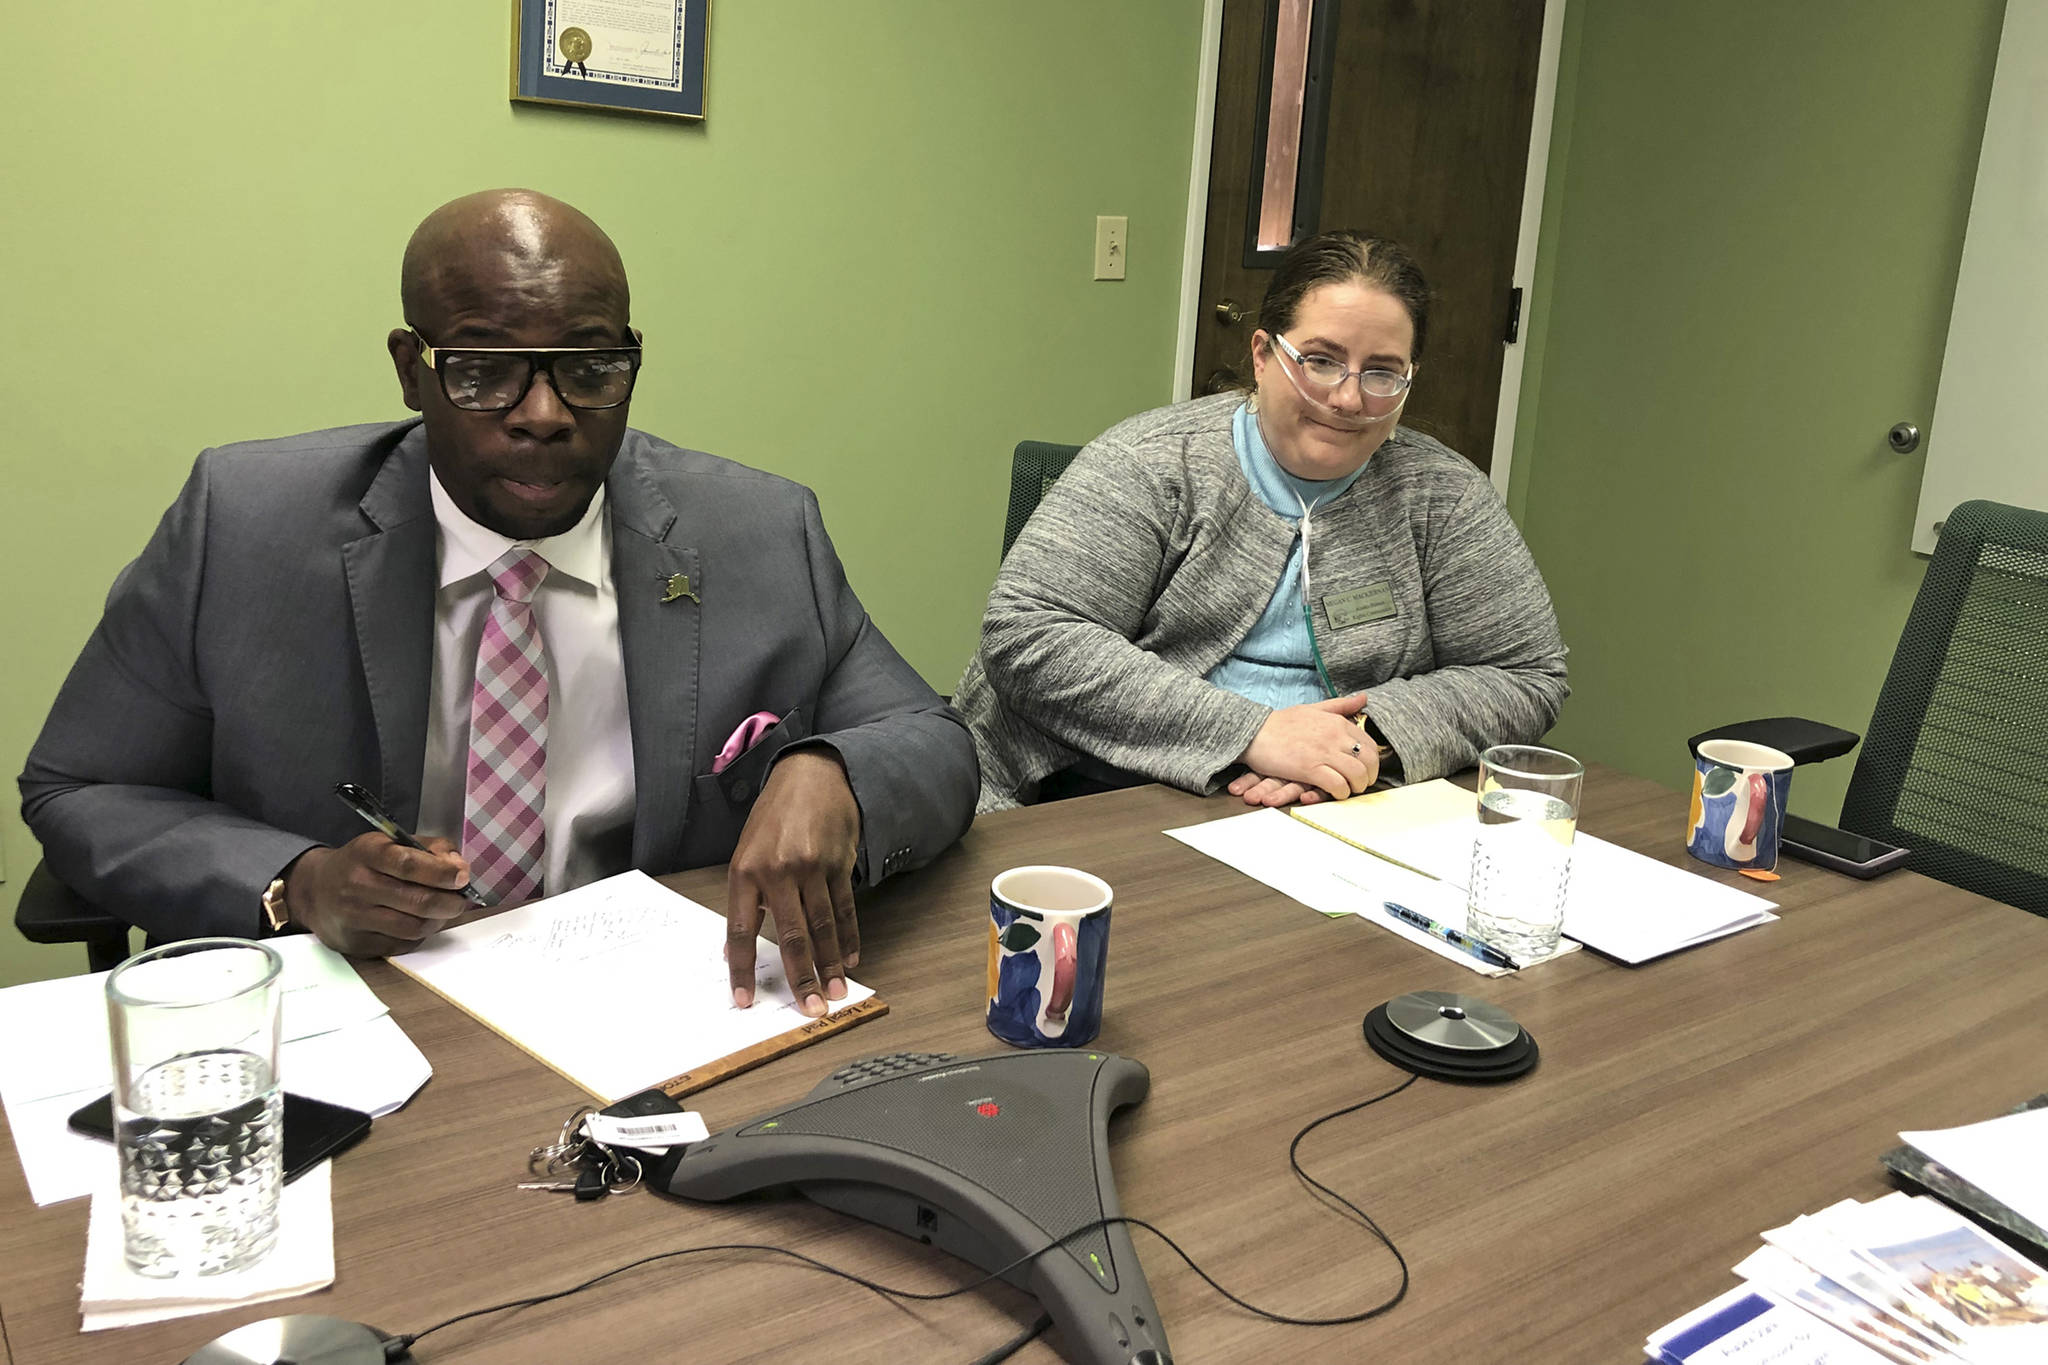 Marcus Sanders, left, and Megan Mackiernan are shown during a meeting of the Alaska State Commission for Human Rights on Thursday, April 18, 2019, in Anchorage, Alaska. Mackiernan was elected chairman and Sanders was elected vice chair after recent departures left the commission without members in those positions. (Mark Thiessen | Associated Press)